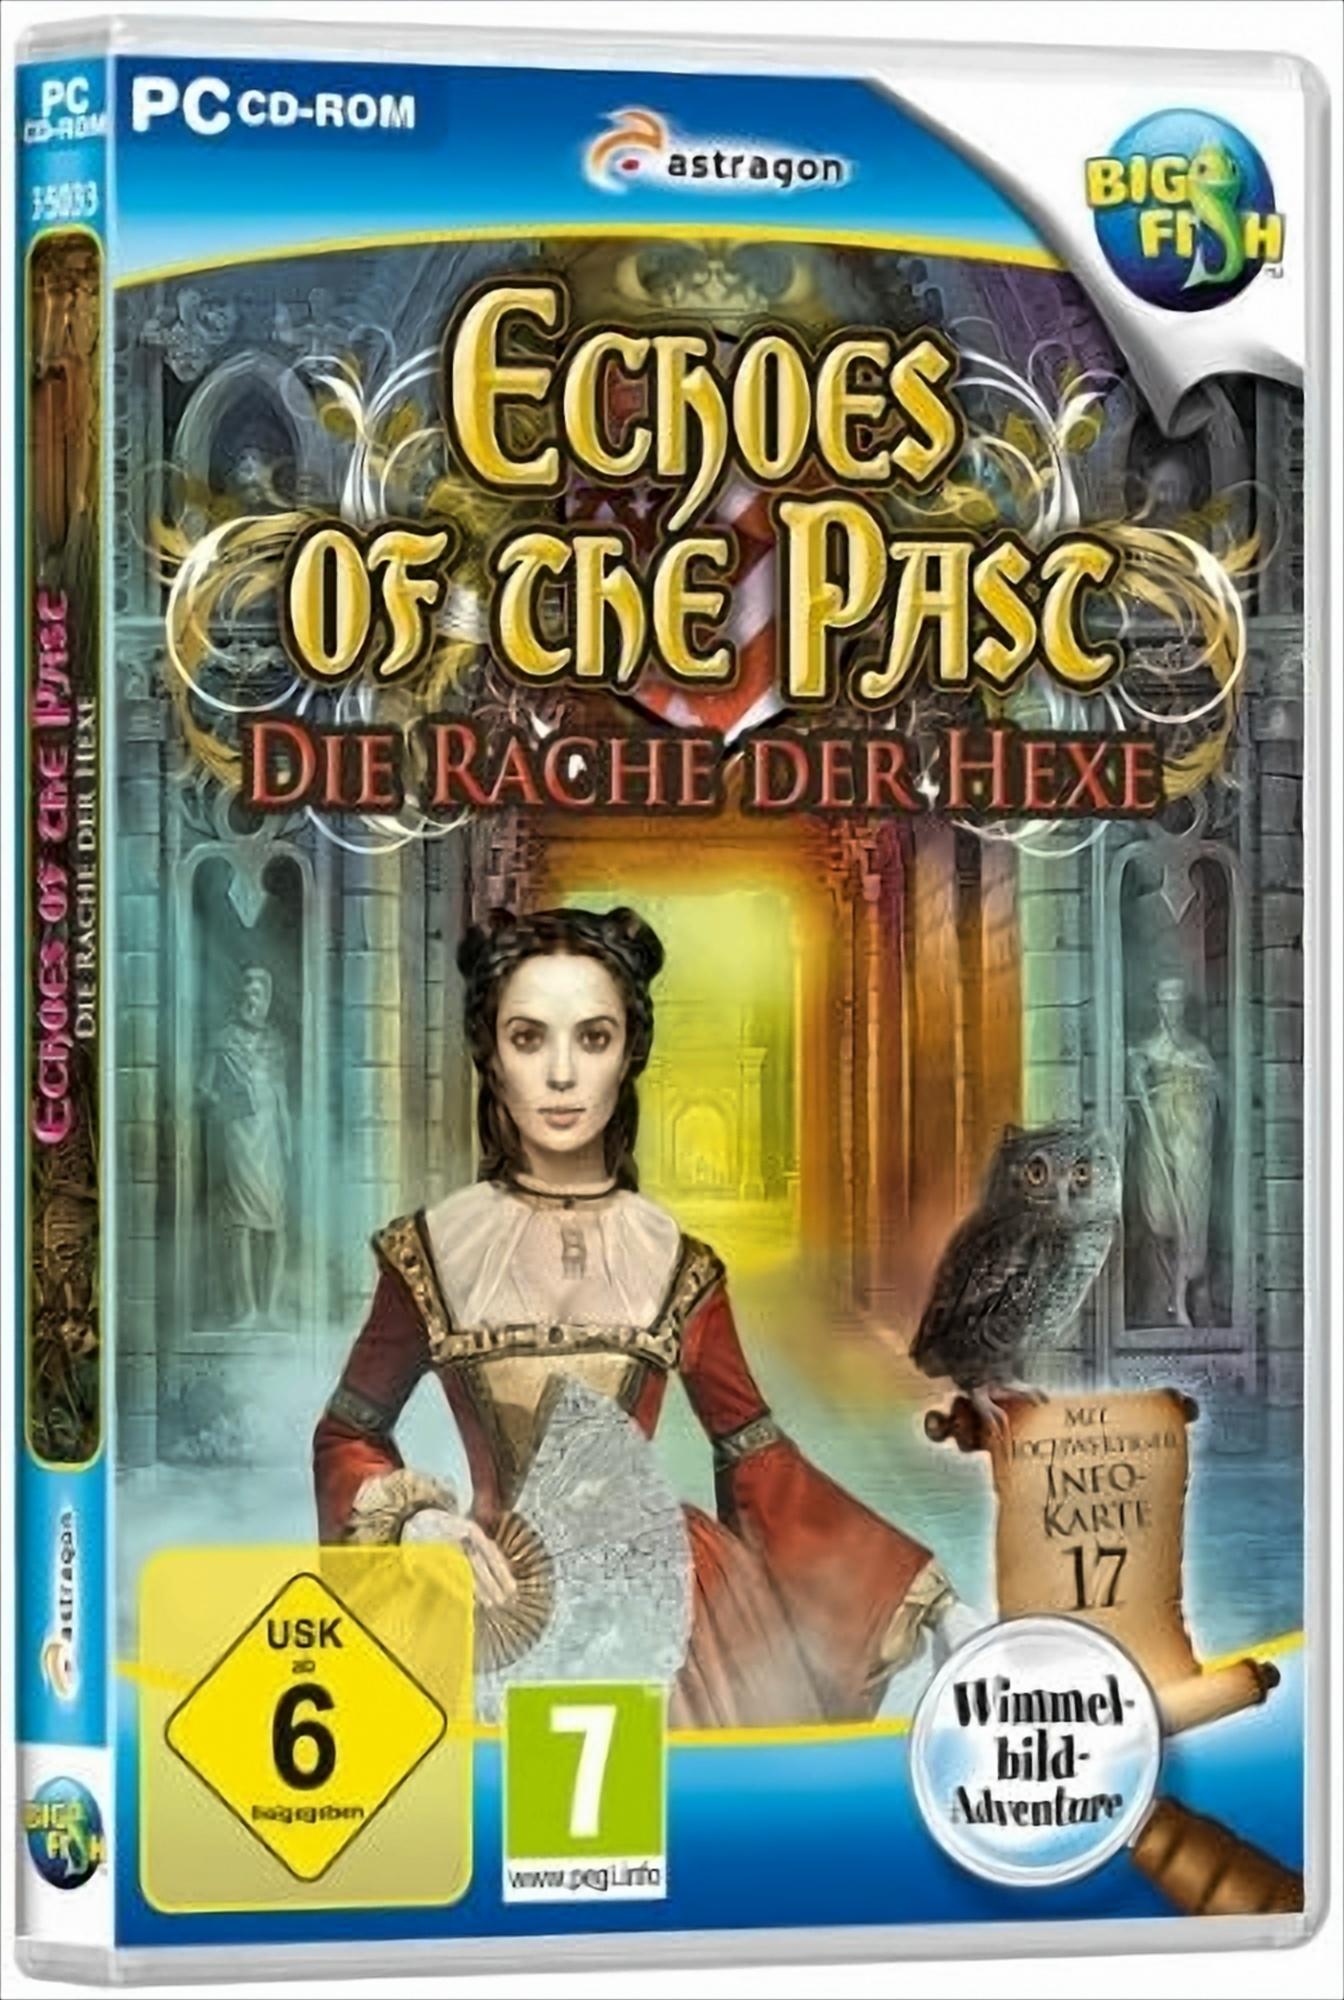 Echoes Of The Past: Die der - Rache [PC] Hexe